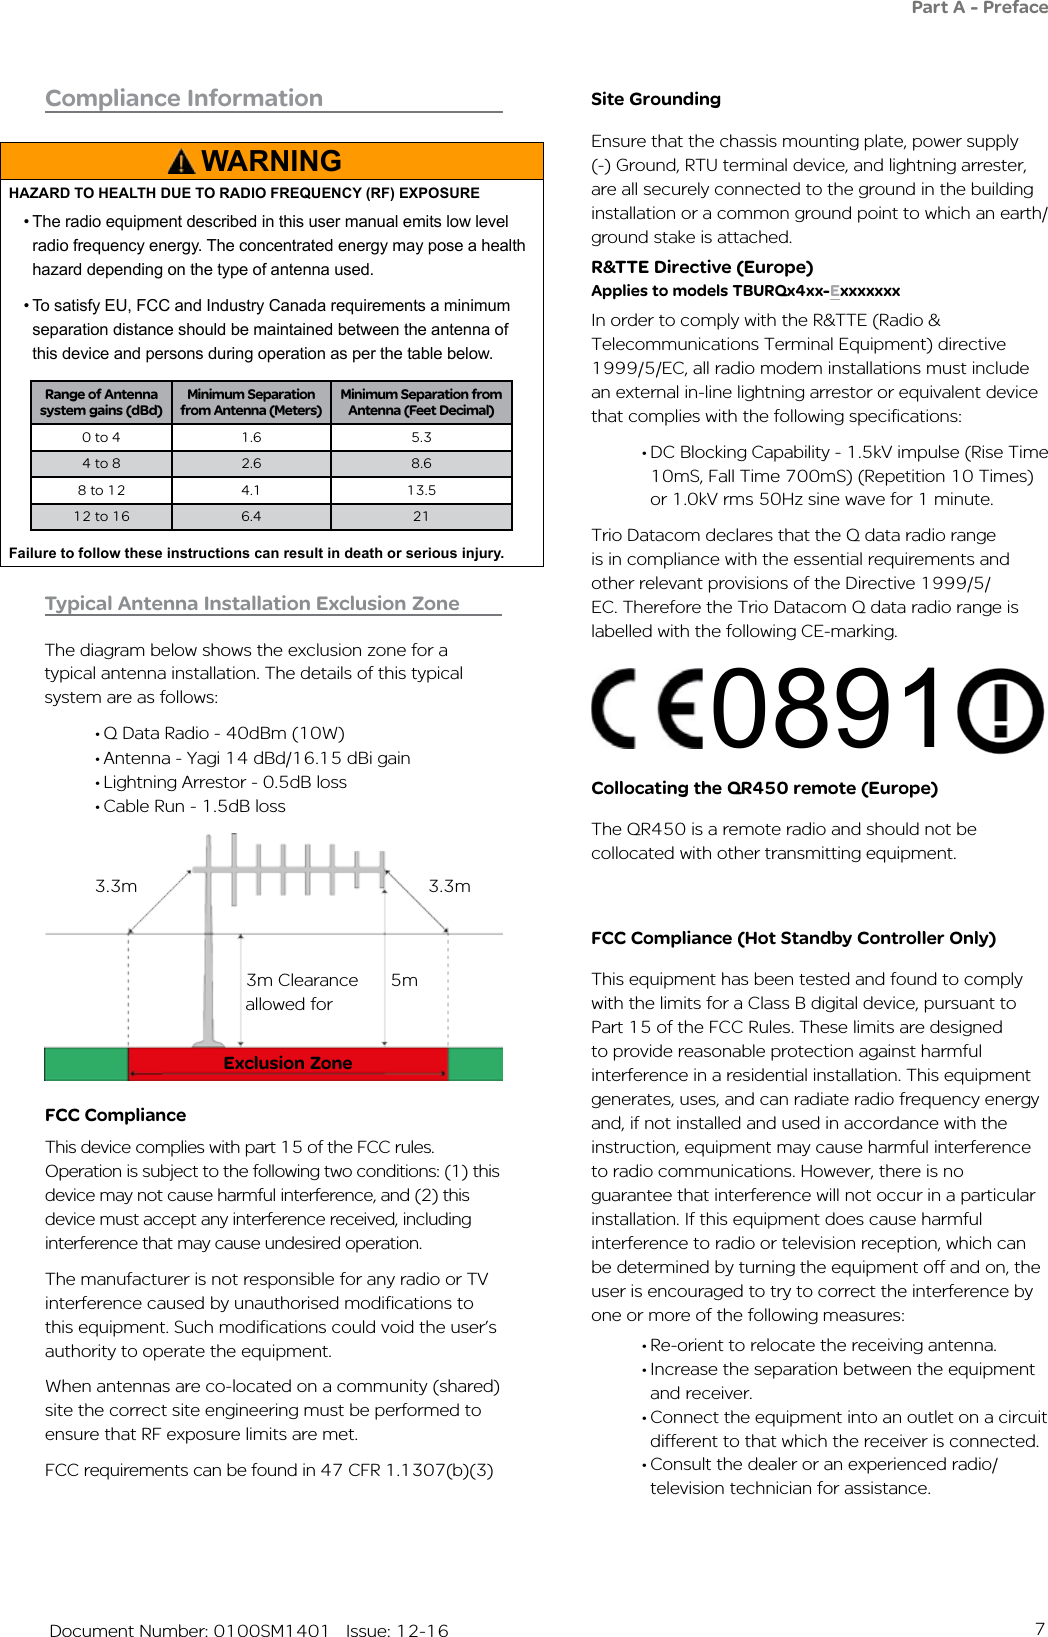 7   Document Number: 0100SM1401   Issue: 12-16WARNINGHAZARD TO HEALTH DUE TO RADIO FREQUENCY (RF) EXPOSURE• The radio equipment described in this user manual emits low level radio frequency energy. The concentrated energy may pose a health hazard depending on the type of antenna used. • To satisfy EU, FCC and Industry Canada requirements a minimum separation distance should be maintained between the antenna of this device and persons during operation as per the table below.Range of Antenna system gains (dBd)Minimum Separation from Antenna (Meters)Minimum Separation from Antenna (Feet Decimal)0 to 4 1.6 5.34 to 8 2.6 8.68 to 12 4.1 13.512 to 16 6.4 21Failure to follow these instructions can result in death or serious injury.Part A - PrefaceSite GroundingEnsure that the chassis mounting plate, power supply (-) Ground, RTU terminal device, and lightning arrester, are all securely connected to the ground in the building installation or a common ground point to which an earth/ground stake is attached. R&amp;TTE Directive (Europe) Applies to models TBURQx4xx-ExxxxxxxIn order to comply with the R&amp;TTE (Radio &amp; Telecommunications Terminal Equipment) directive 1999/5/EC, all radio modem installations must include an external in-line lightning arrestor or equivalent device that complies with the following specifications: • DC Blocking Capability - 1.5kV impulse (Rise Time 10mS, Fall Time 700mS) (Repetition 10 Times) or 1.0kV rms 50Hz sine wave for 1 minute.Trio Datacom declares that the Q data radio range is in compliance with the essential requirements and other relevant provisions of the Directive 1999/5/EC. Therefore the Trio Datacom Q data radio range is labelled with the following CE-marking.FCC Compliance (Hot Standby Controller Only)This equipment has been tested and found to comply with the limits for a Class B digital device, pursuant to Part 15 of the FCC Rules. These limits are designed to provide reasonable protection against harmful interference in a residential installation. This equipment generates, uses, and can radiate radio frequency energy and, if not installed and used in accordance with the instruction, equipment may cause harmful interference to radio communications. However, there is no guarantee that interference will not occur in a particular installation. If this equipment does cause harmful interference to radio or television reception, which can be determined by turning the equipment off and on, the user is encouraged to try to correct the interference by one or more of the following measures:• Re-orient to relocate the receiving antenna.• Increase the separation between the equipment and receiver.• Connect the equipment into an outlet on a circuit different to that which the receiver is connected.• Consult the dealer or an experienced radio/television technician for assistance.Compliance InformationExclusion Zone3m Clearance allowed for5m3.3m3.3mTypical Antenna Installation Exclusion ZoneThe diagram below shows the exclusion zone for a typical antenna installation. The details of this typical system are as follows:• Q Data Radio - 40dBm (10W)• Antenna - Yagi 14 dBd/16.15 dBi gain• Lightning Arrestor - 0.5dB loss• Cable Run - 1.5dB loss0891Collocating the QR450 remote (Europe)The QR450 is a remote radio and should not be collocated with other transmitting equipment.FCC ComplianceThis device complies with part 15 of the FCC rules. Operation is subject to the following two conditions: (1) this device may not cause harmful interference, and (2) this device must accept any interference received, including interference that may cause undesired operation.The manufacturer is not responsible for any radio or TV interference caused by unauthorised modifications to this equipment. Such modifications could void the user’s authority to operate the equipment.When antennas are co-located on a community (shared) site the correct site engineering must be performed to ensure that RF exposure limits are met. FCC requirements can be found in 47 CFR 1.1307(b)(3)